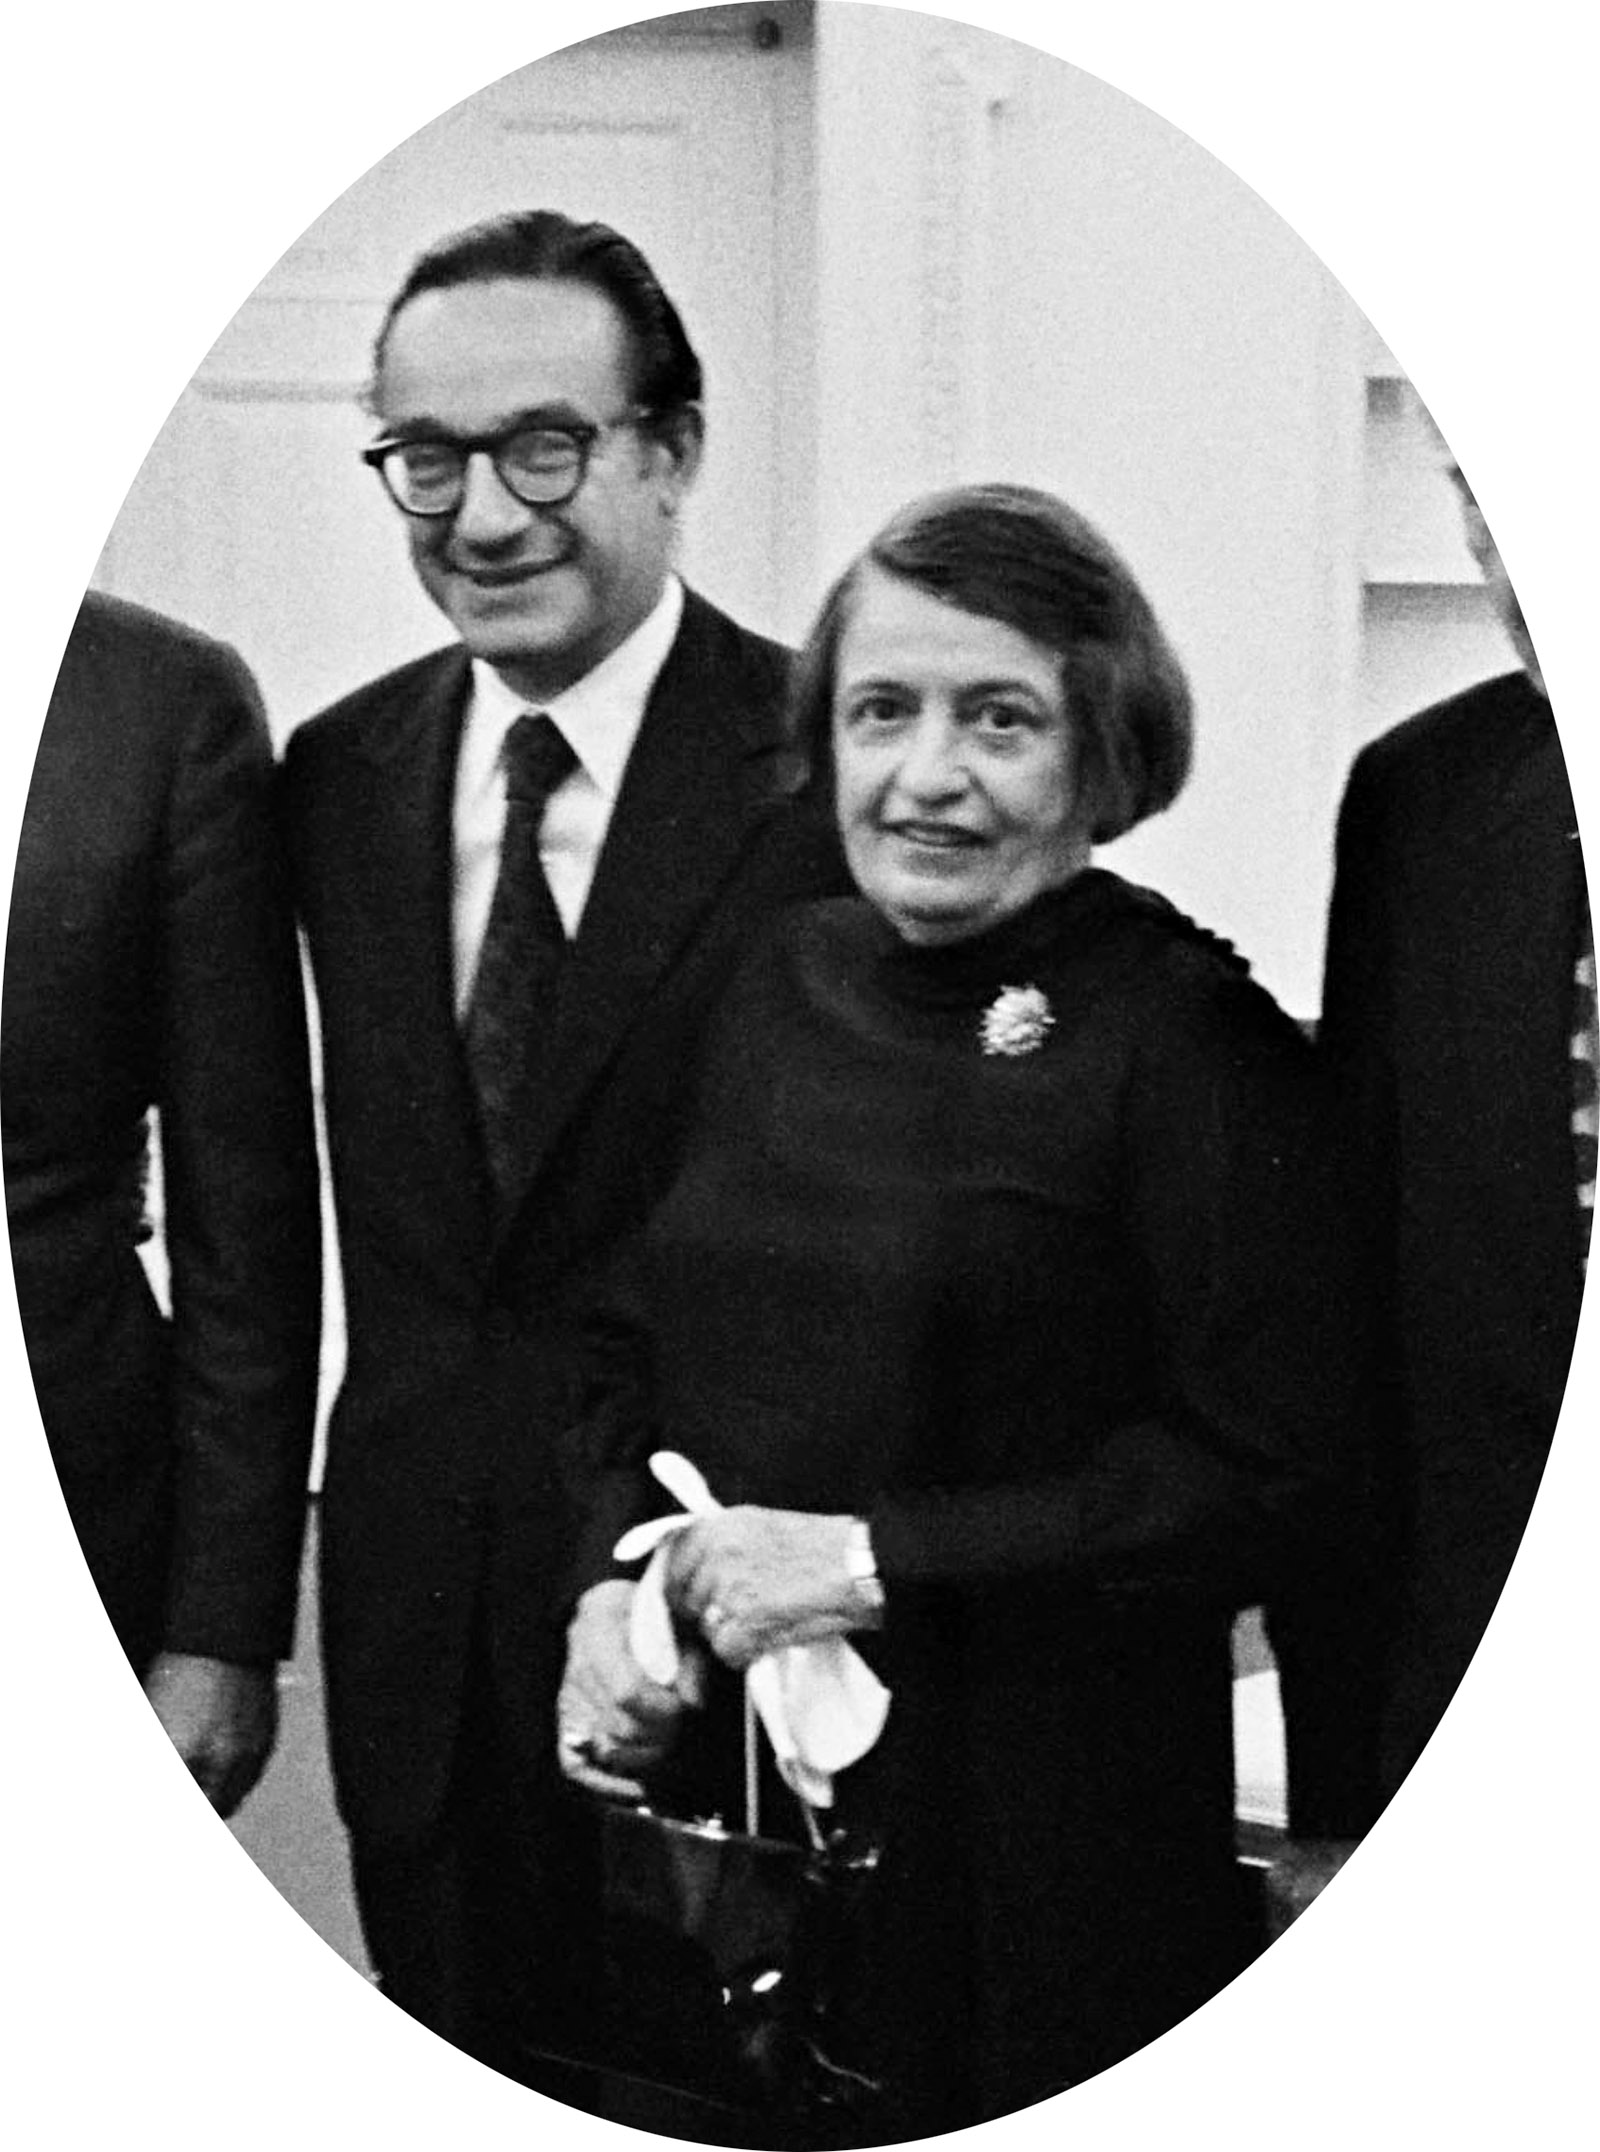 Alan Greenspan and Ayn Rand at the White House after Greenspan was sworn in as chairman of Gerald Ford’s Council of Economic Advisers, September 1974